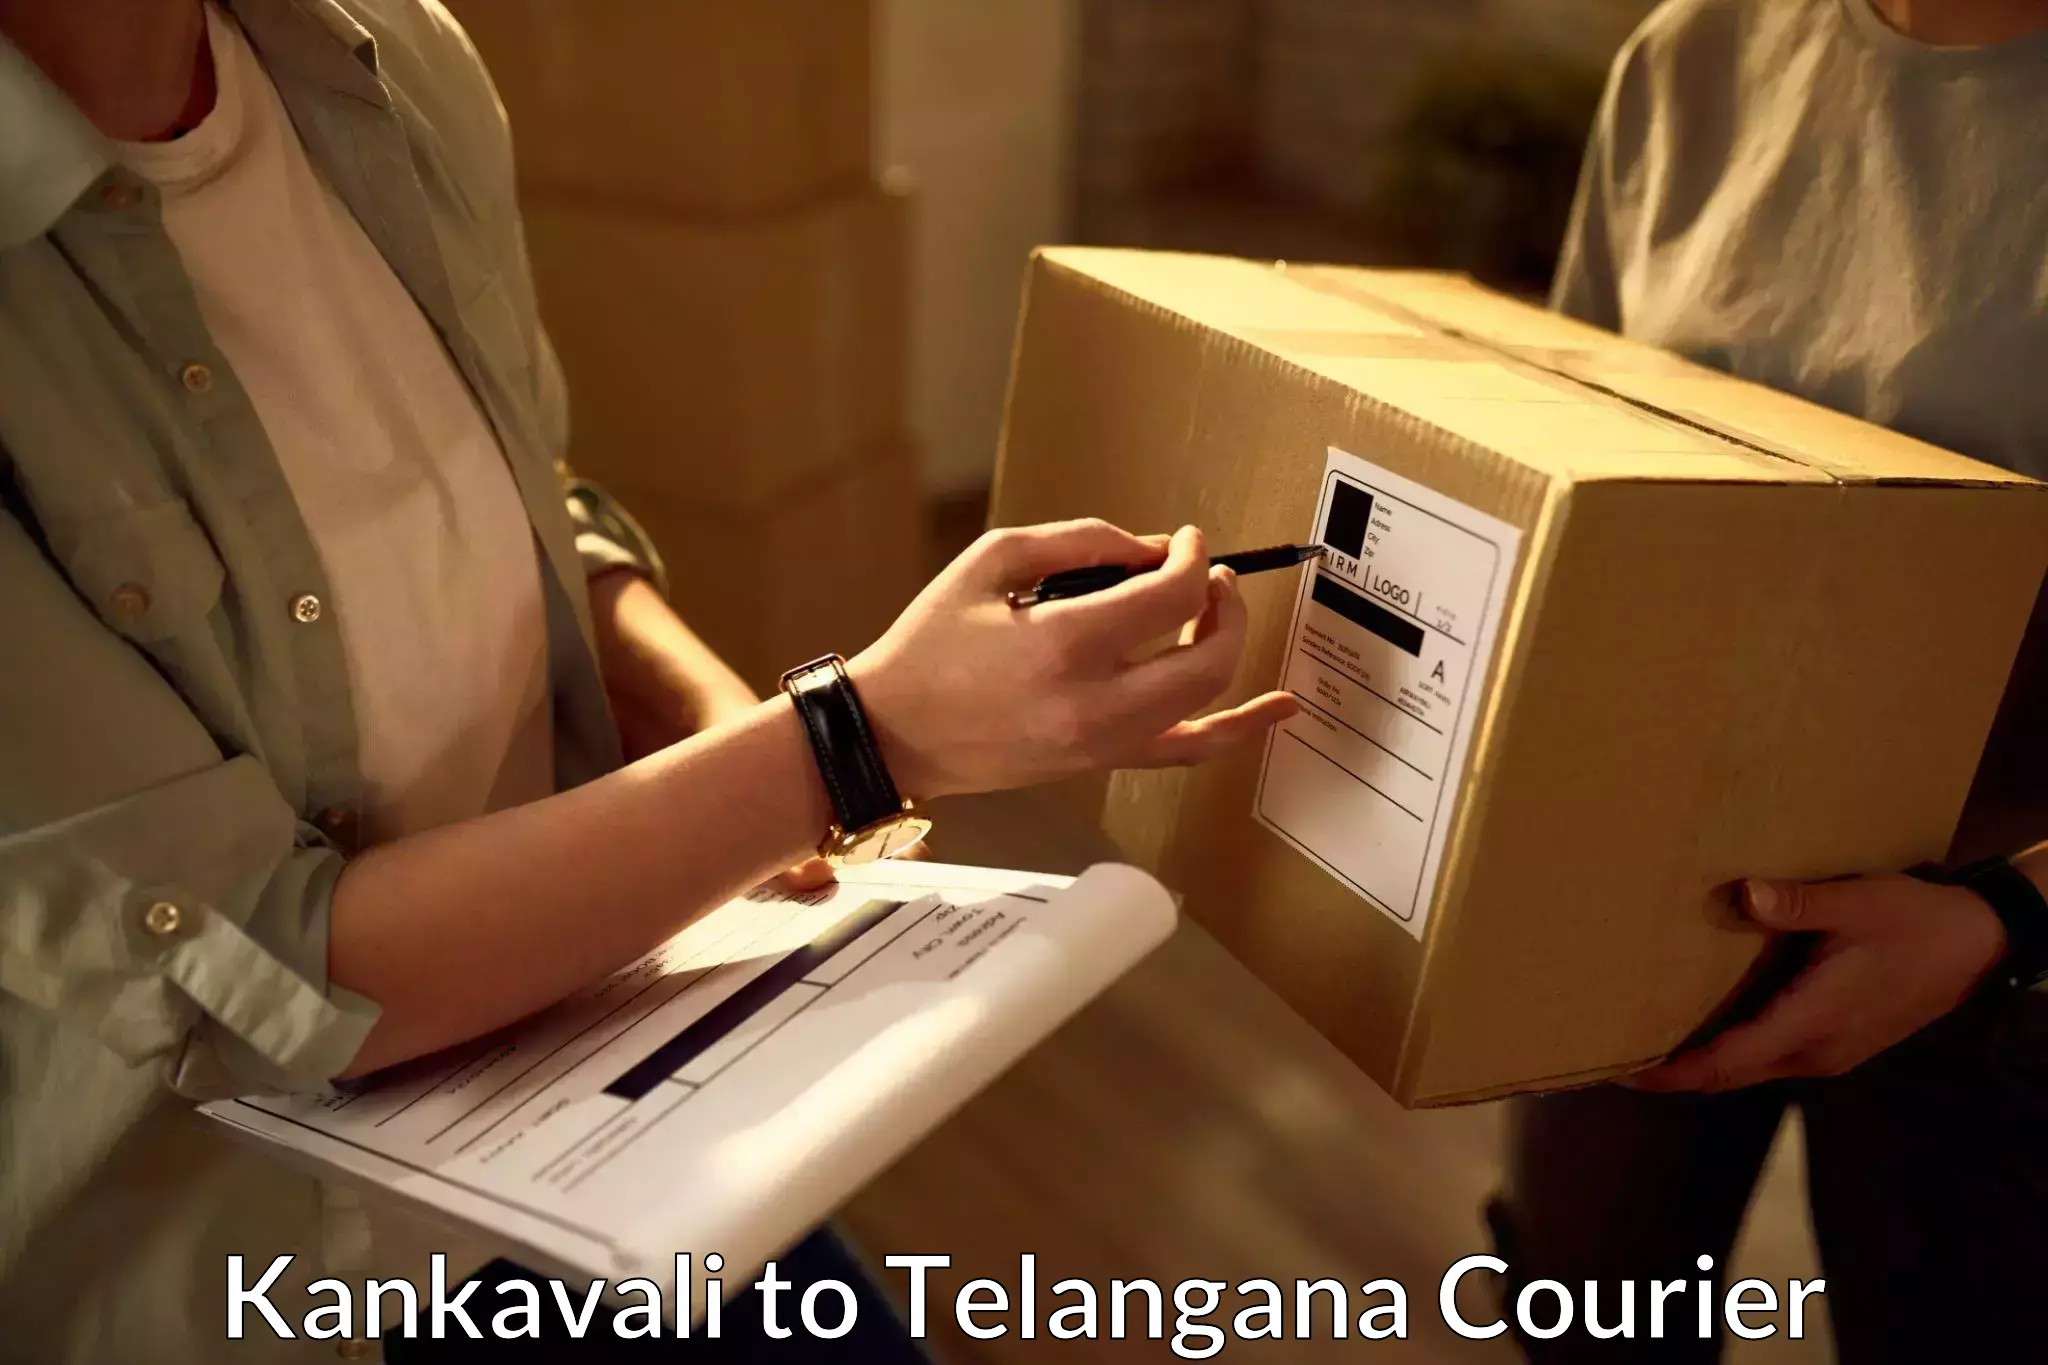 On-call courier service Kankavali to Telangana